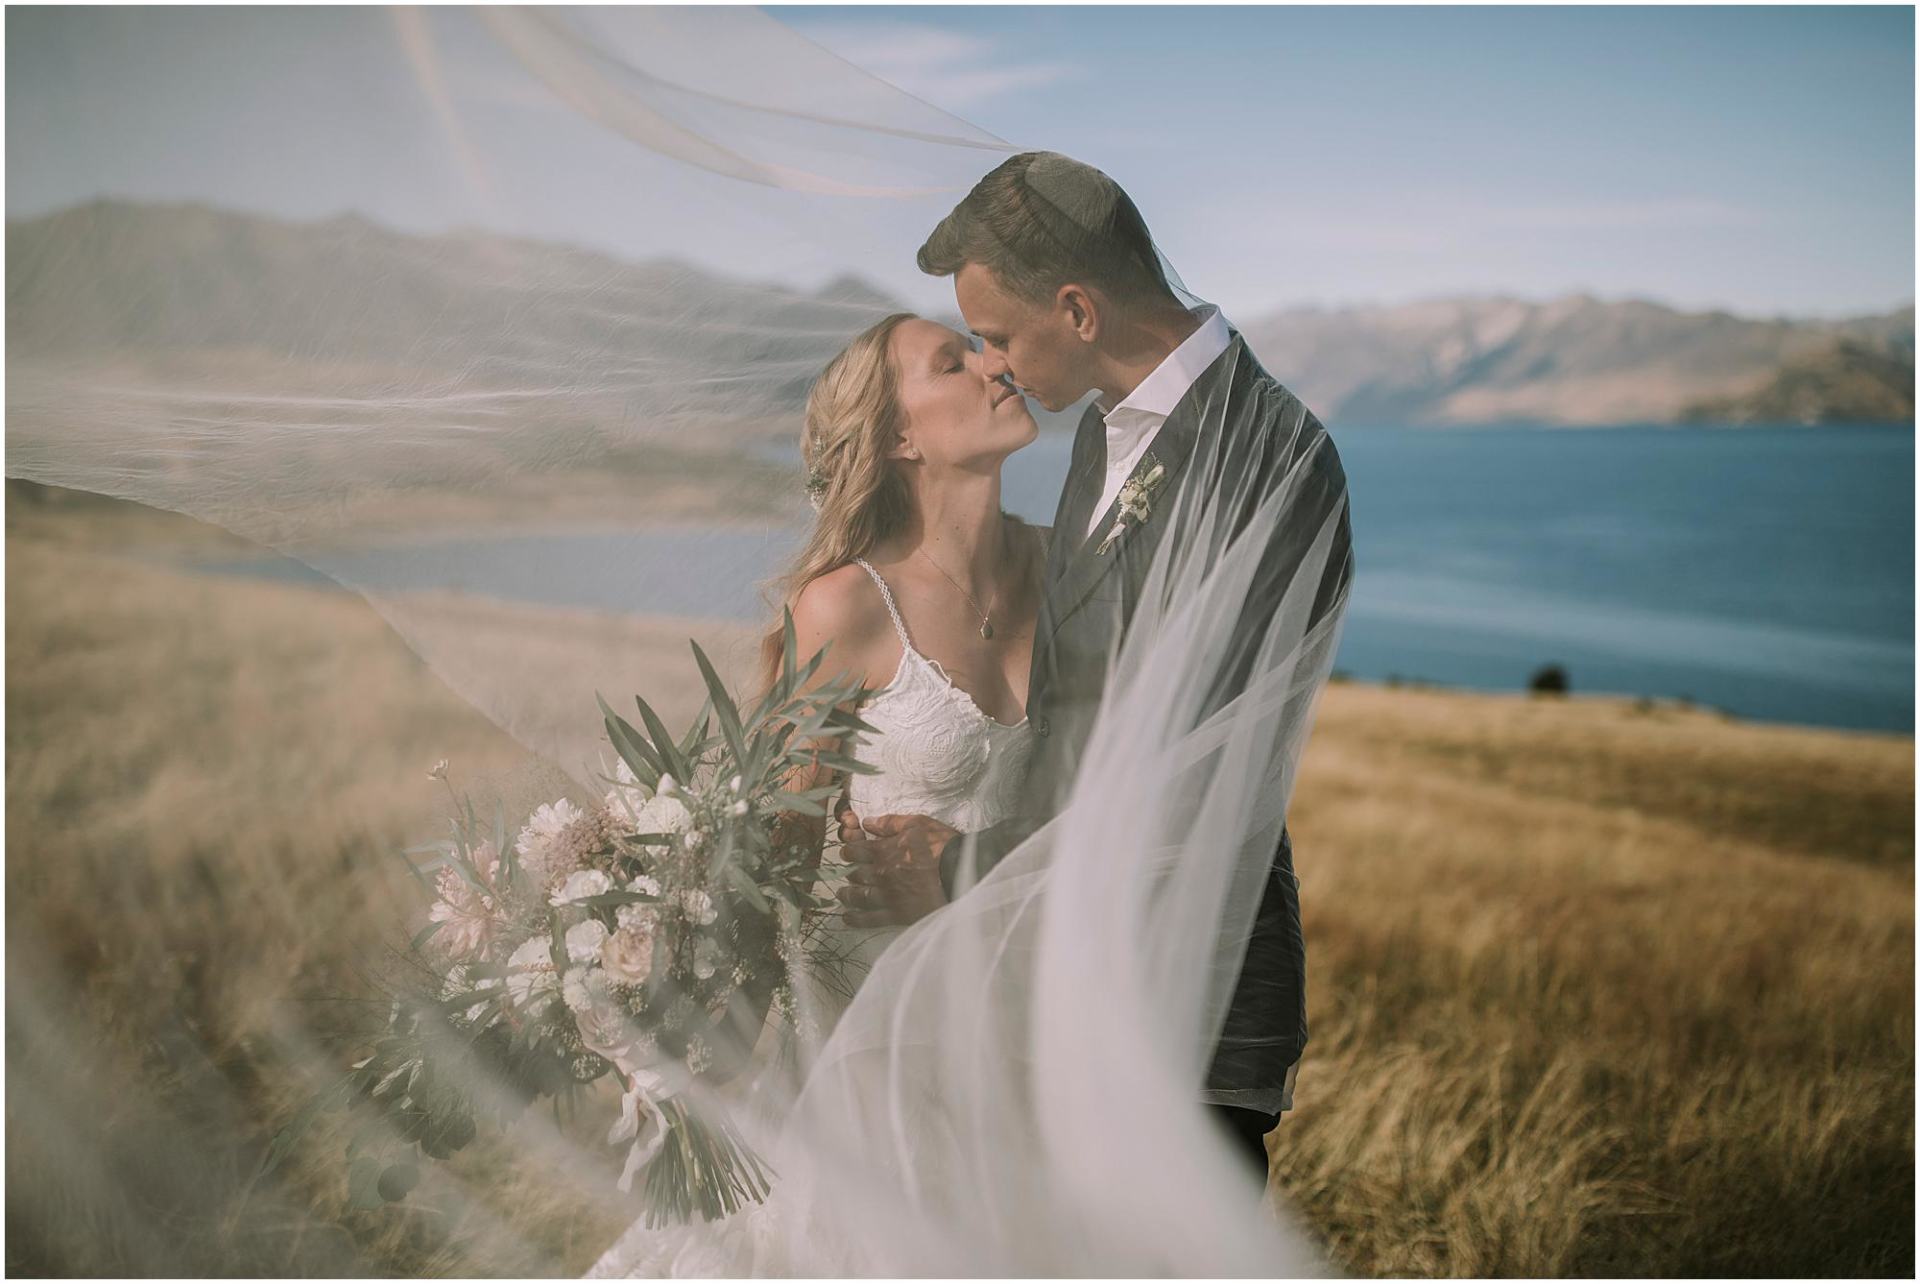 Charlotte Kiri Photography - Wedding Photography of a bride wearing a pretty shoestring strap lace dress leaning in to kiss her groom who wears a smart black suit with a white open shirt, as he holds her waist as the veil floats around them, in front of Lake Hawea in Wanaka, New Zealand